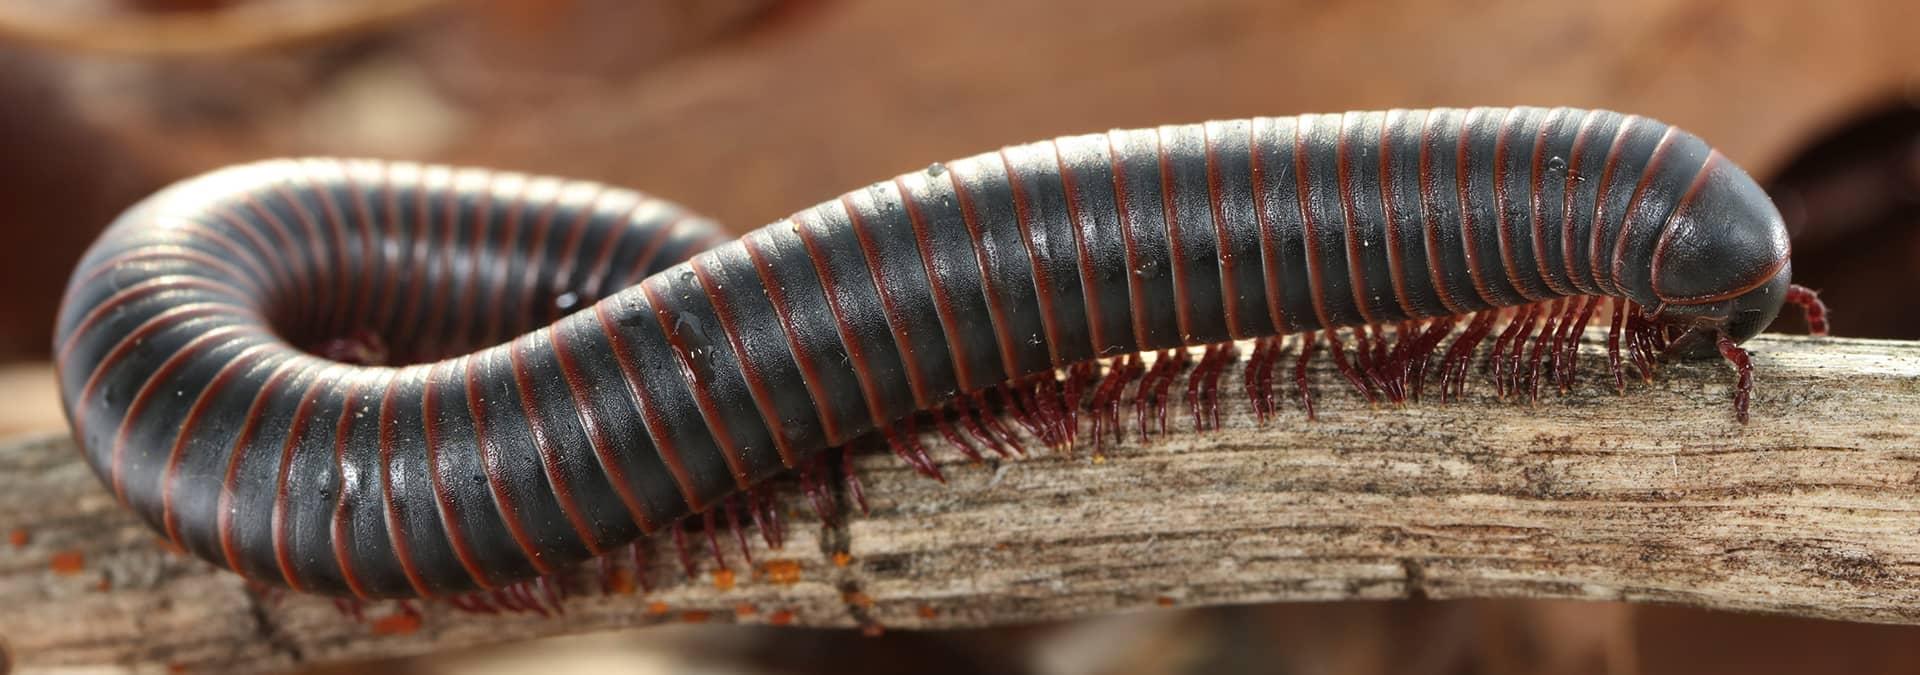 A Guide To Millipedes In Northeast Florida. a millipede outside of a home i...